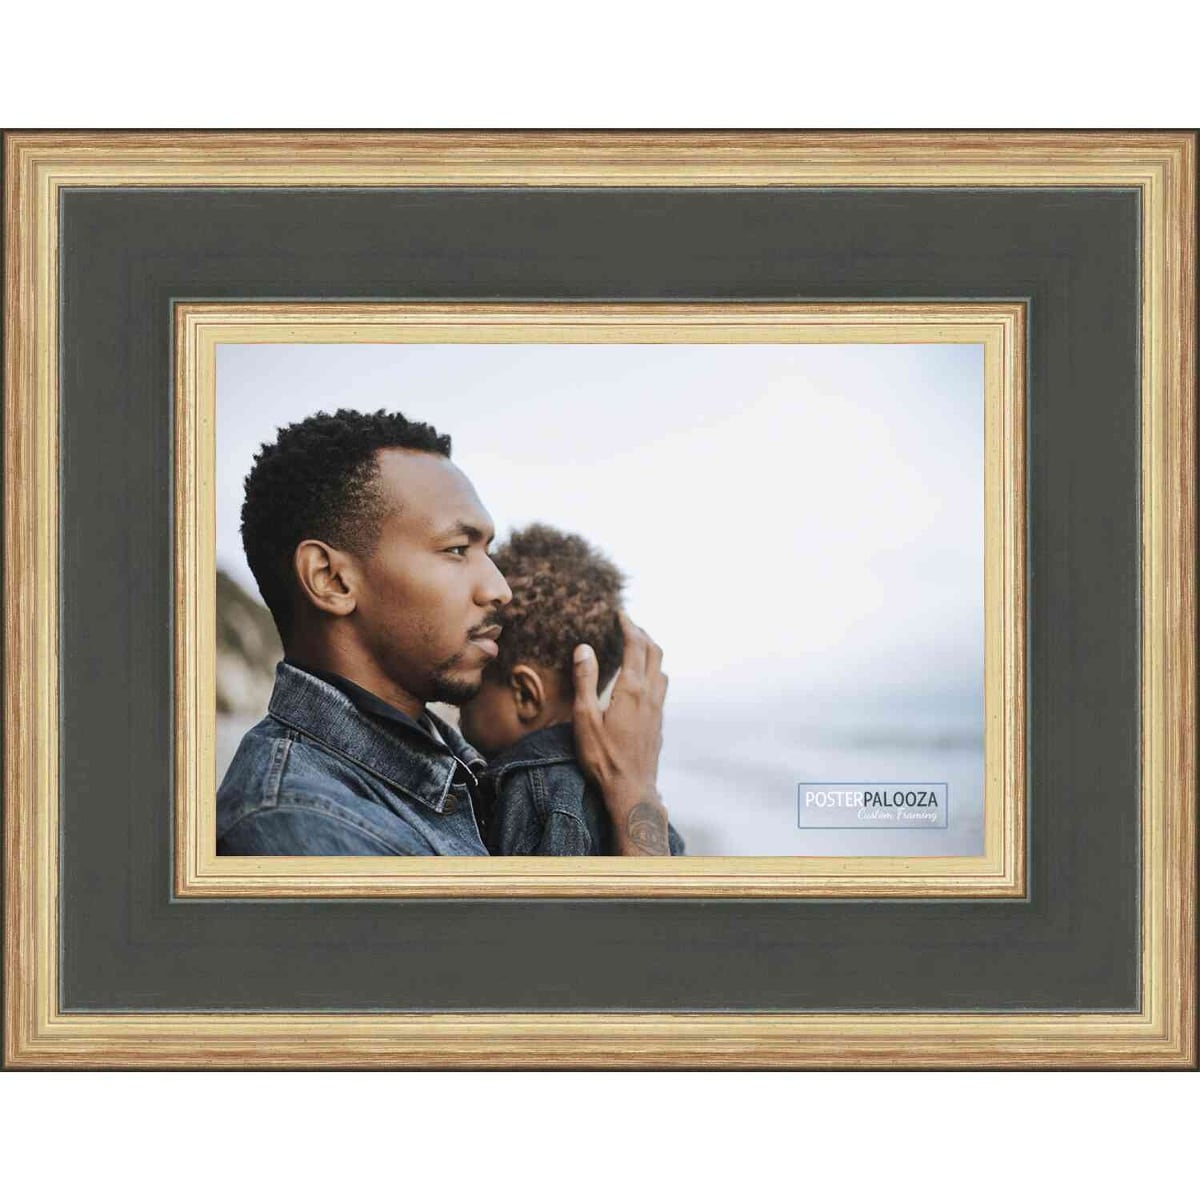 https://ak1.ostkcdn.com/images/products/is/images/direct/635bfbcf78be17206aae83f93811e8a6022a509b/15x20-Traditional-Gold-Complete-Wood-Picture-Frame-with-UV-Acrylic%2C-Foam-Board-Backing%2C-%26-Hardware.jpg